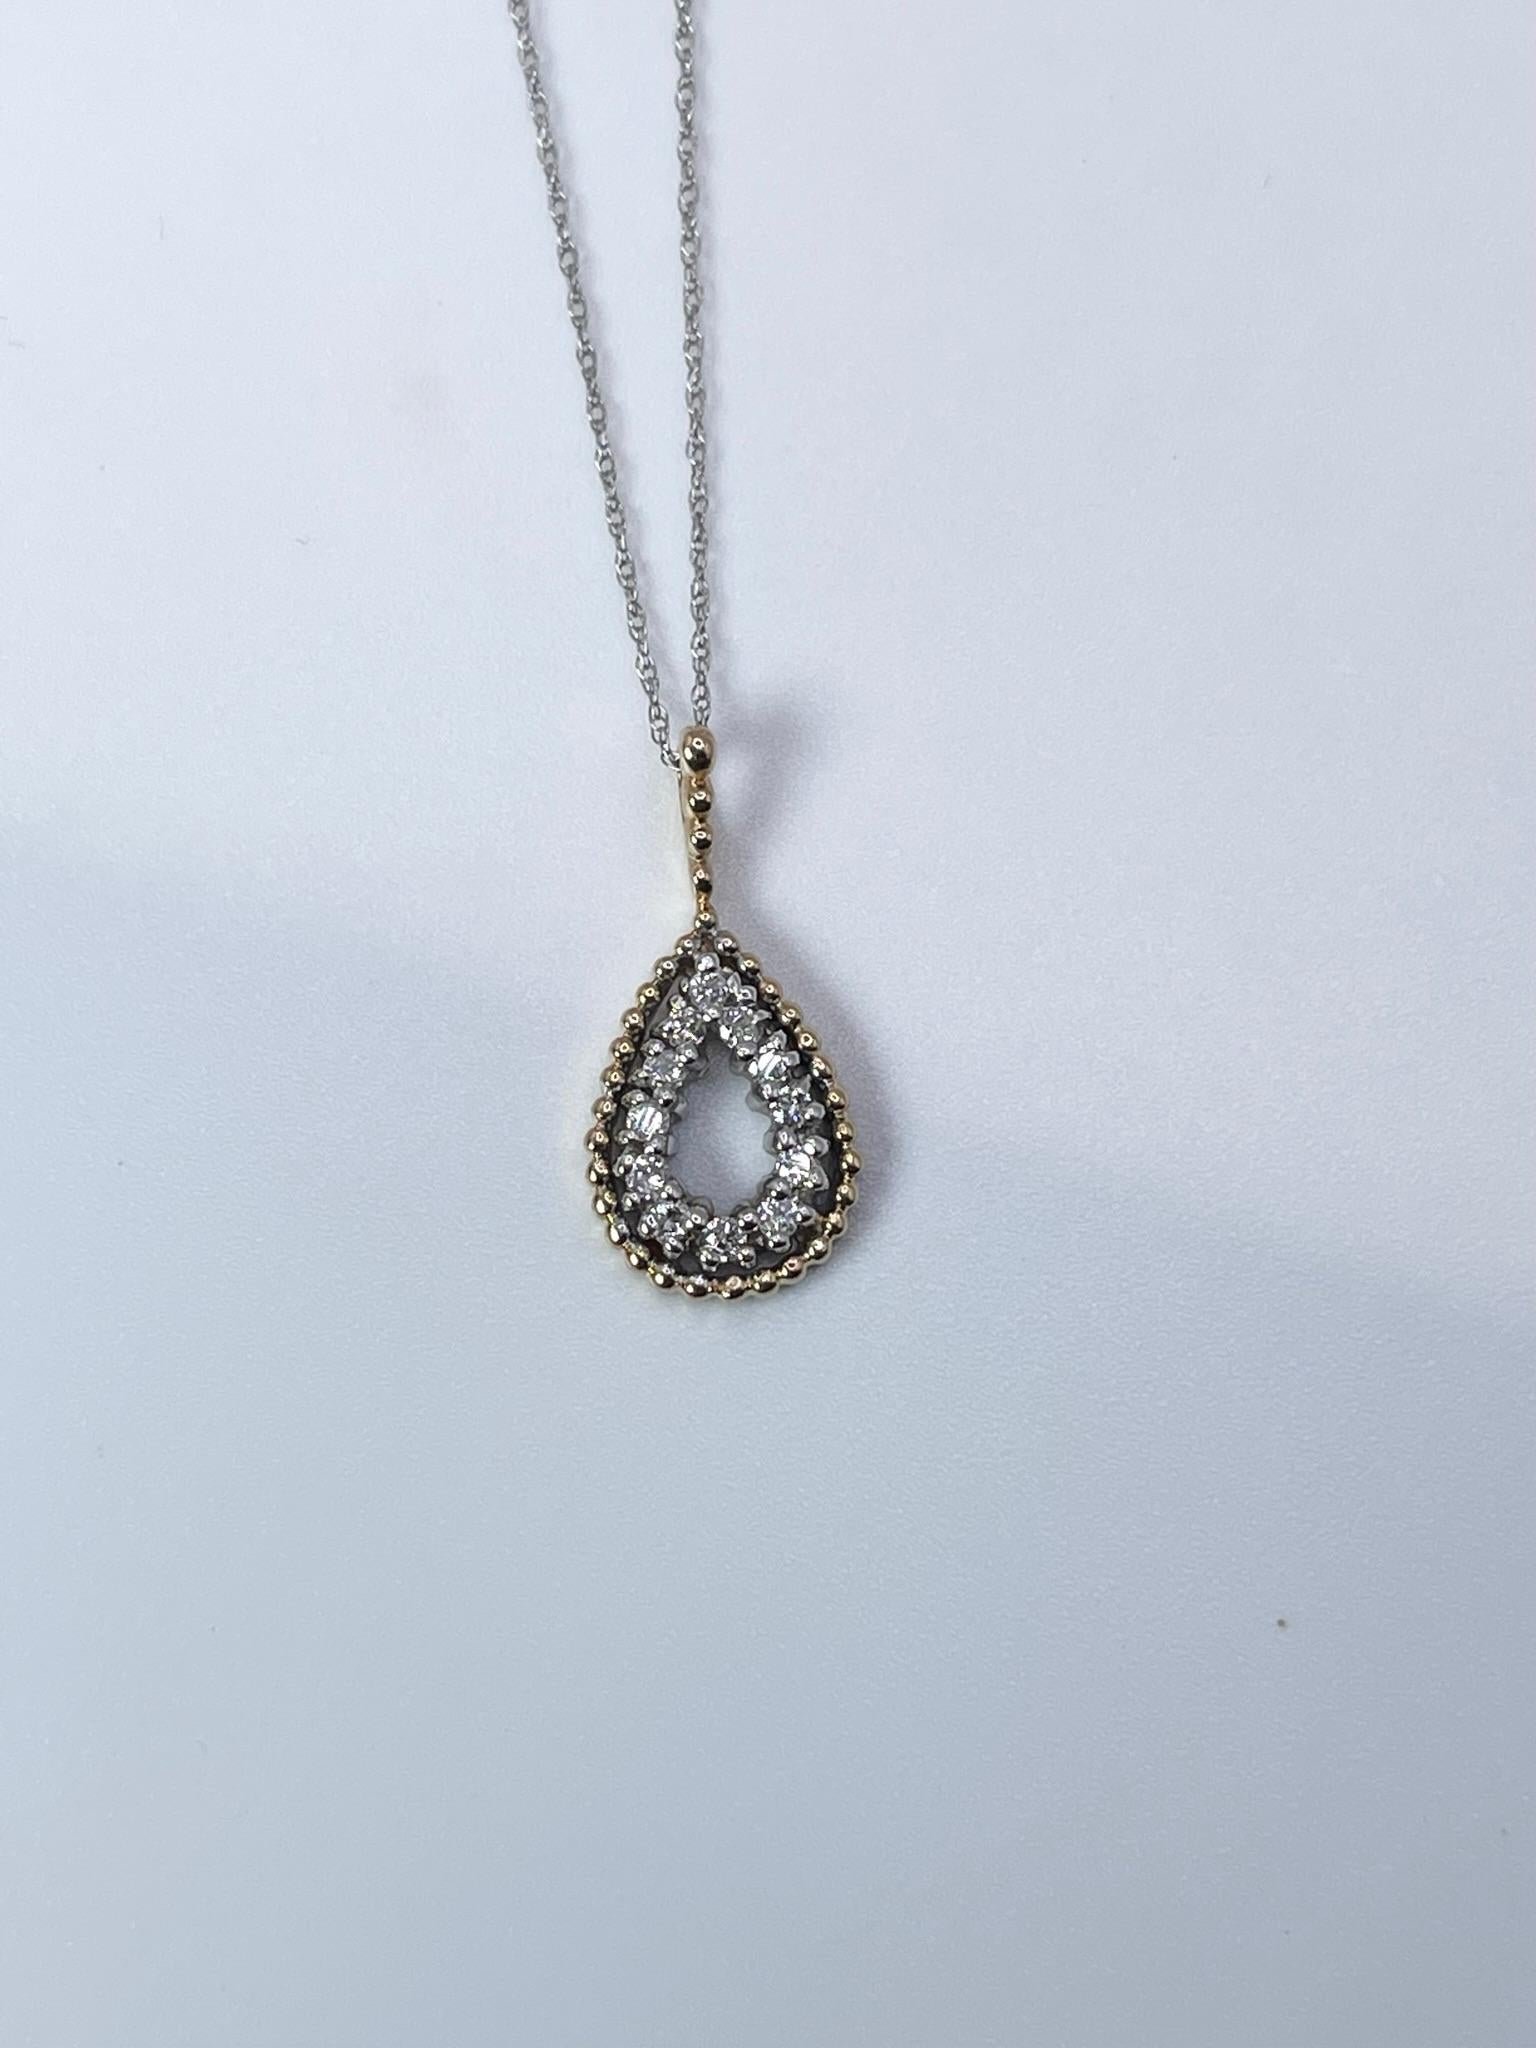 Elegant diamond pendant in pear shape with natural diamonds in two tone gold 14KT marked.

GRAM WEIGHT: 1.62gr
GOLD: 14KT white/yellow gold
NECKLACE chain-18